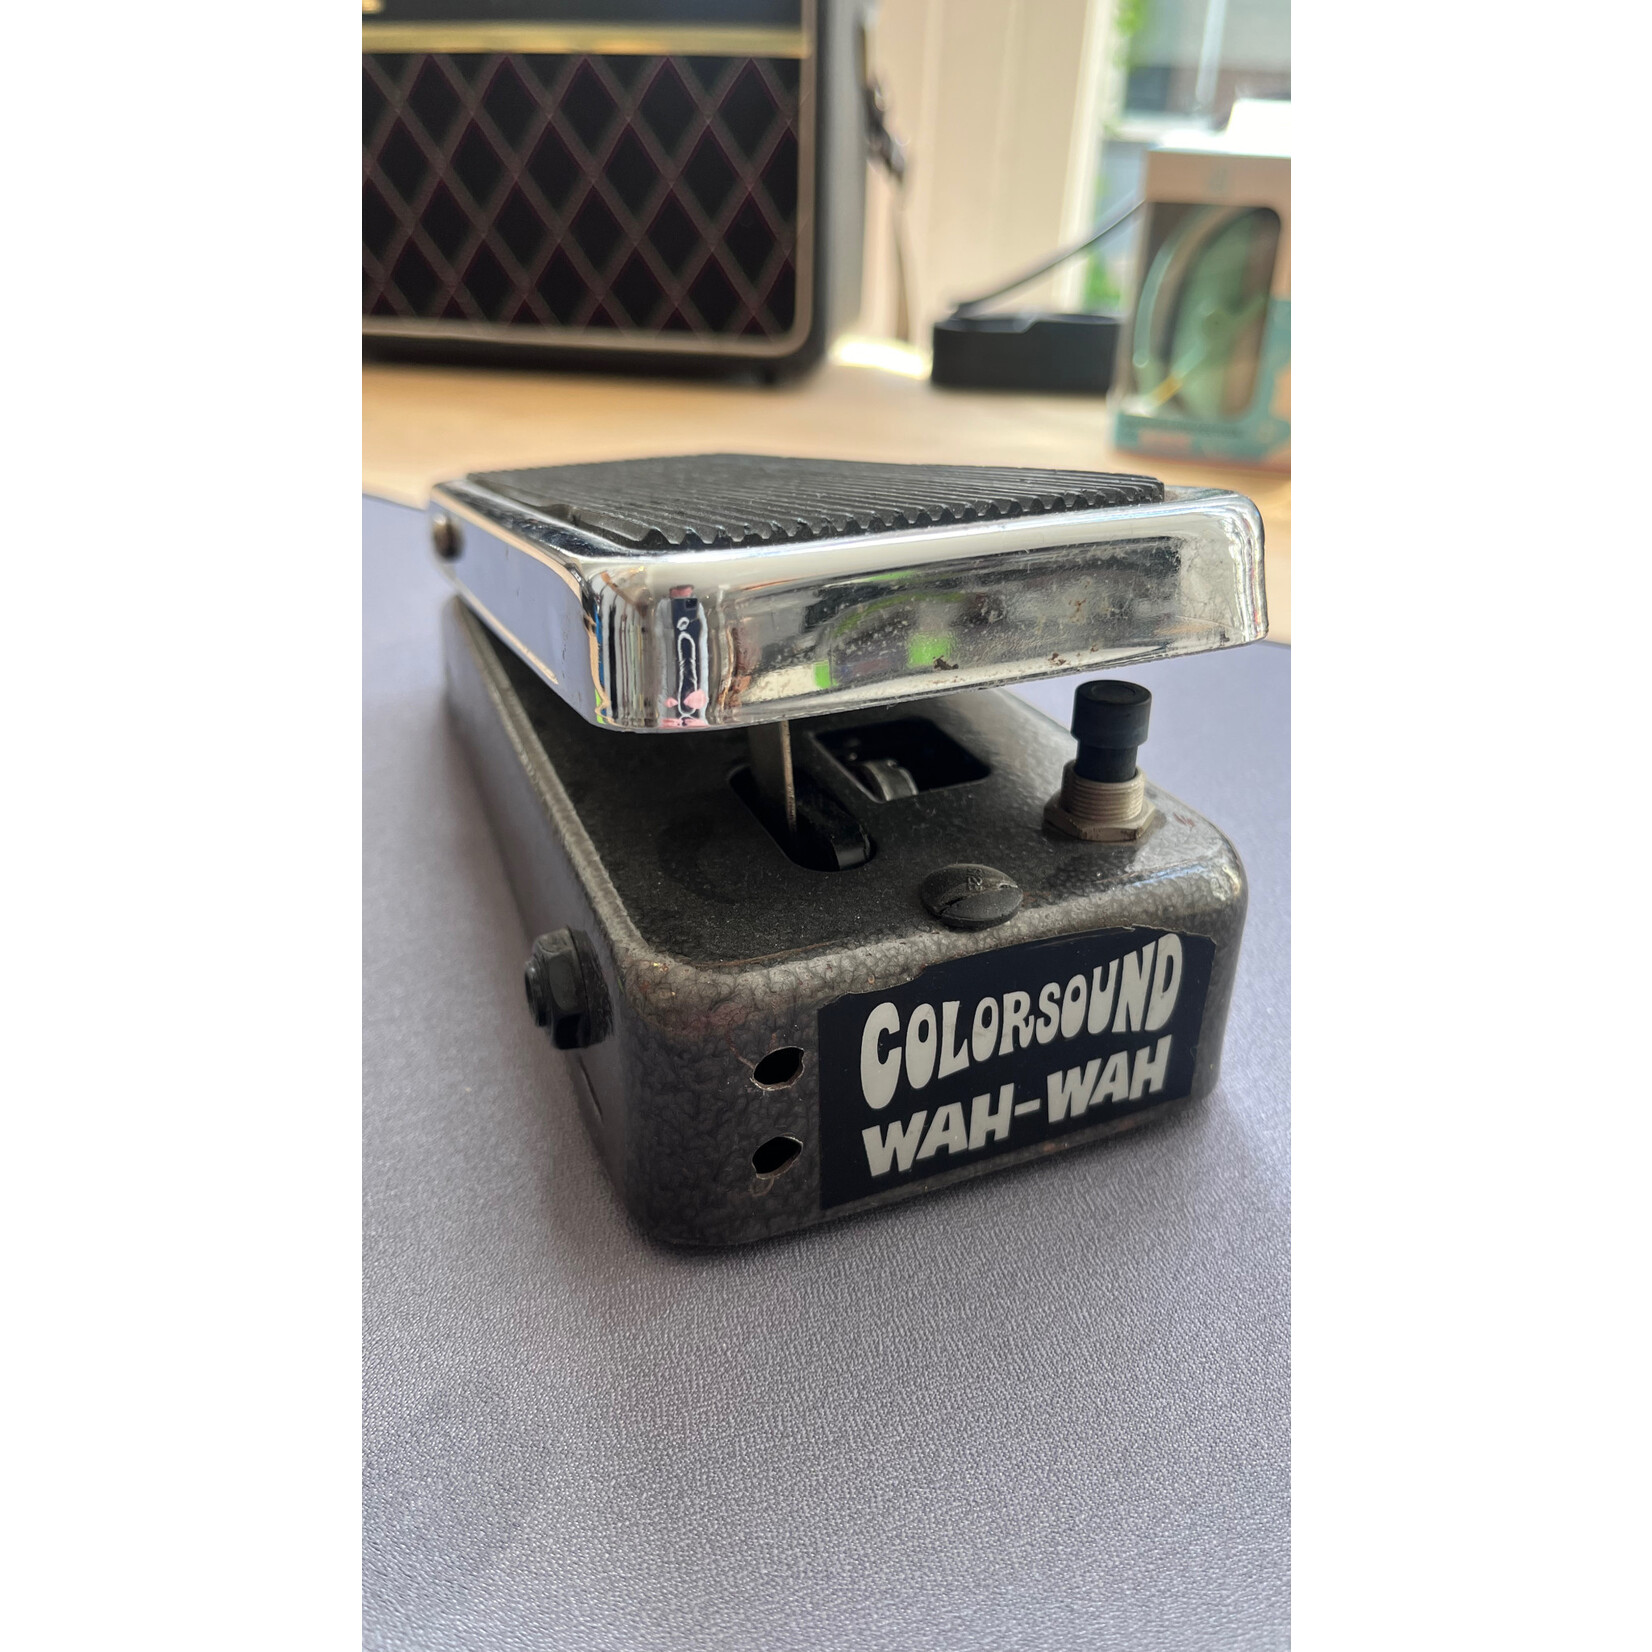 Colorsound Colorsound Wah, gray, vintage pedal, made in UK (pre owned)